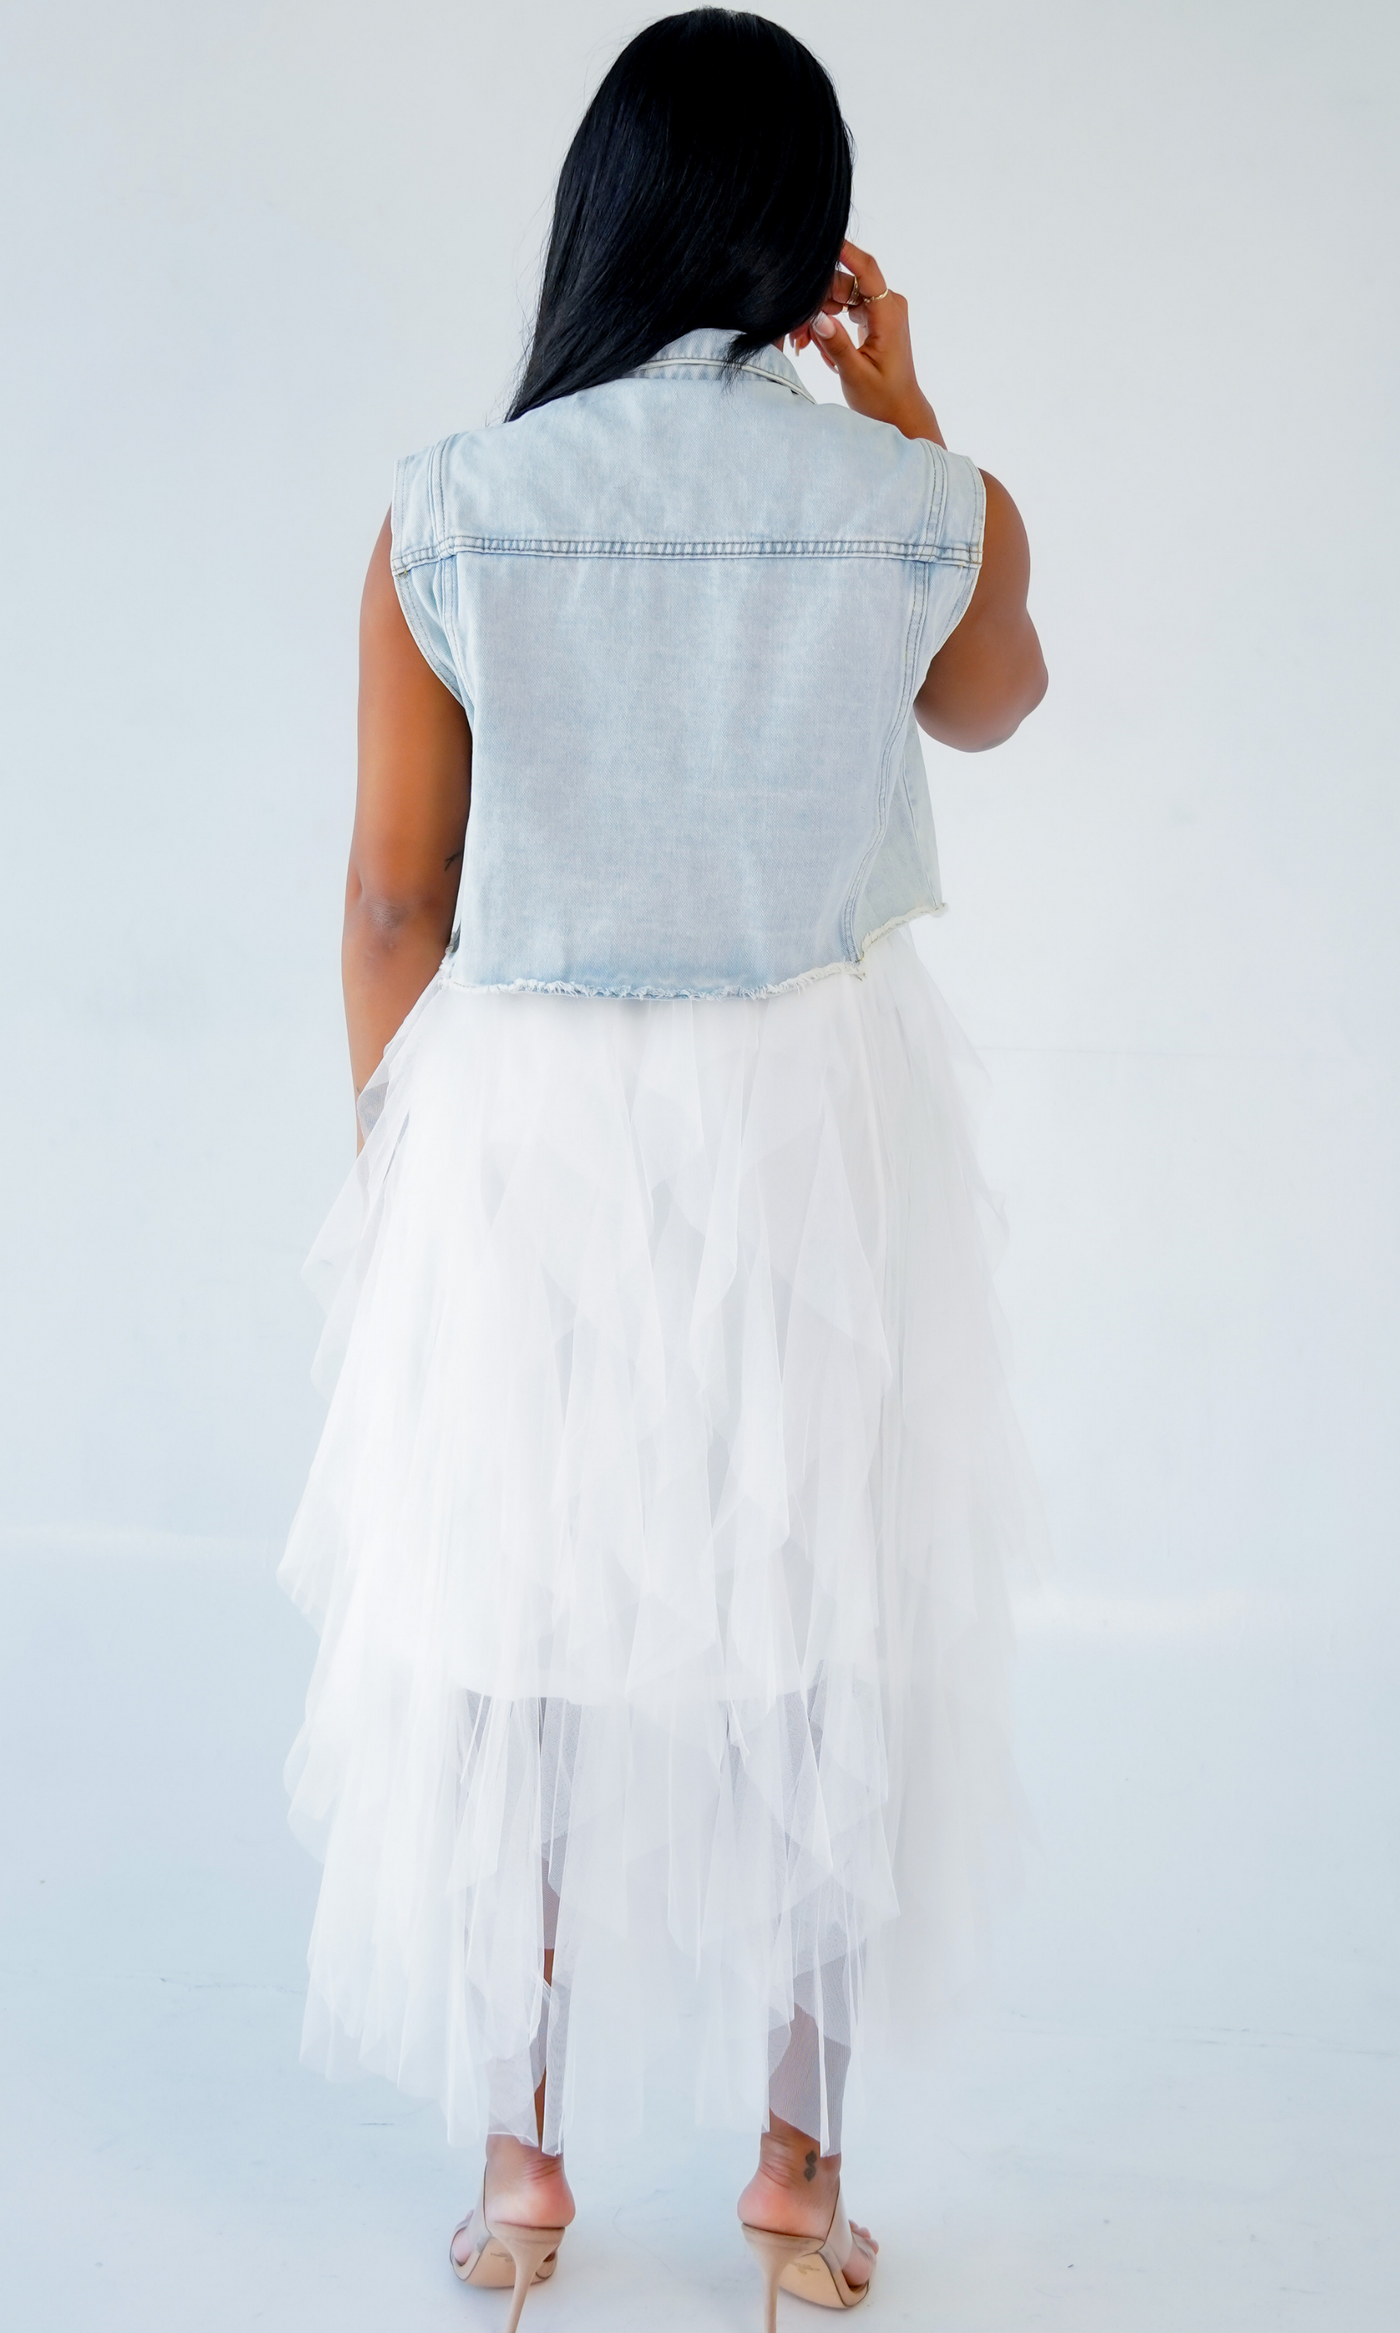 Crystal Clear I Layer Ruffle Skirt - White - Cutely Covered